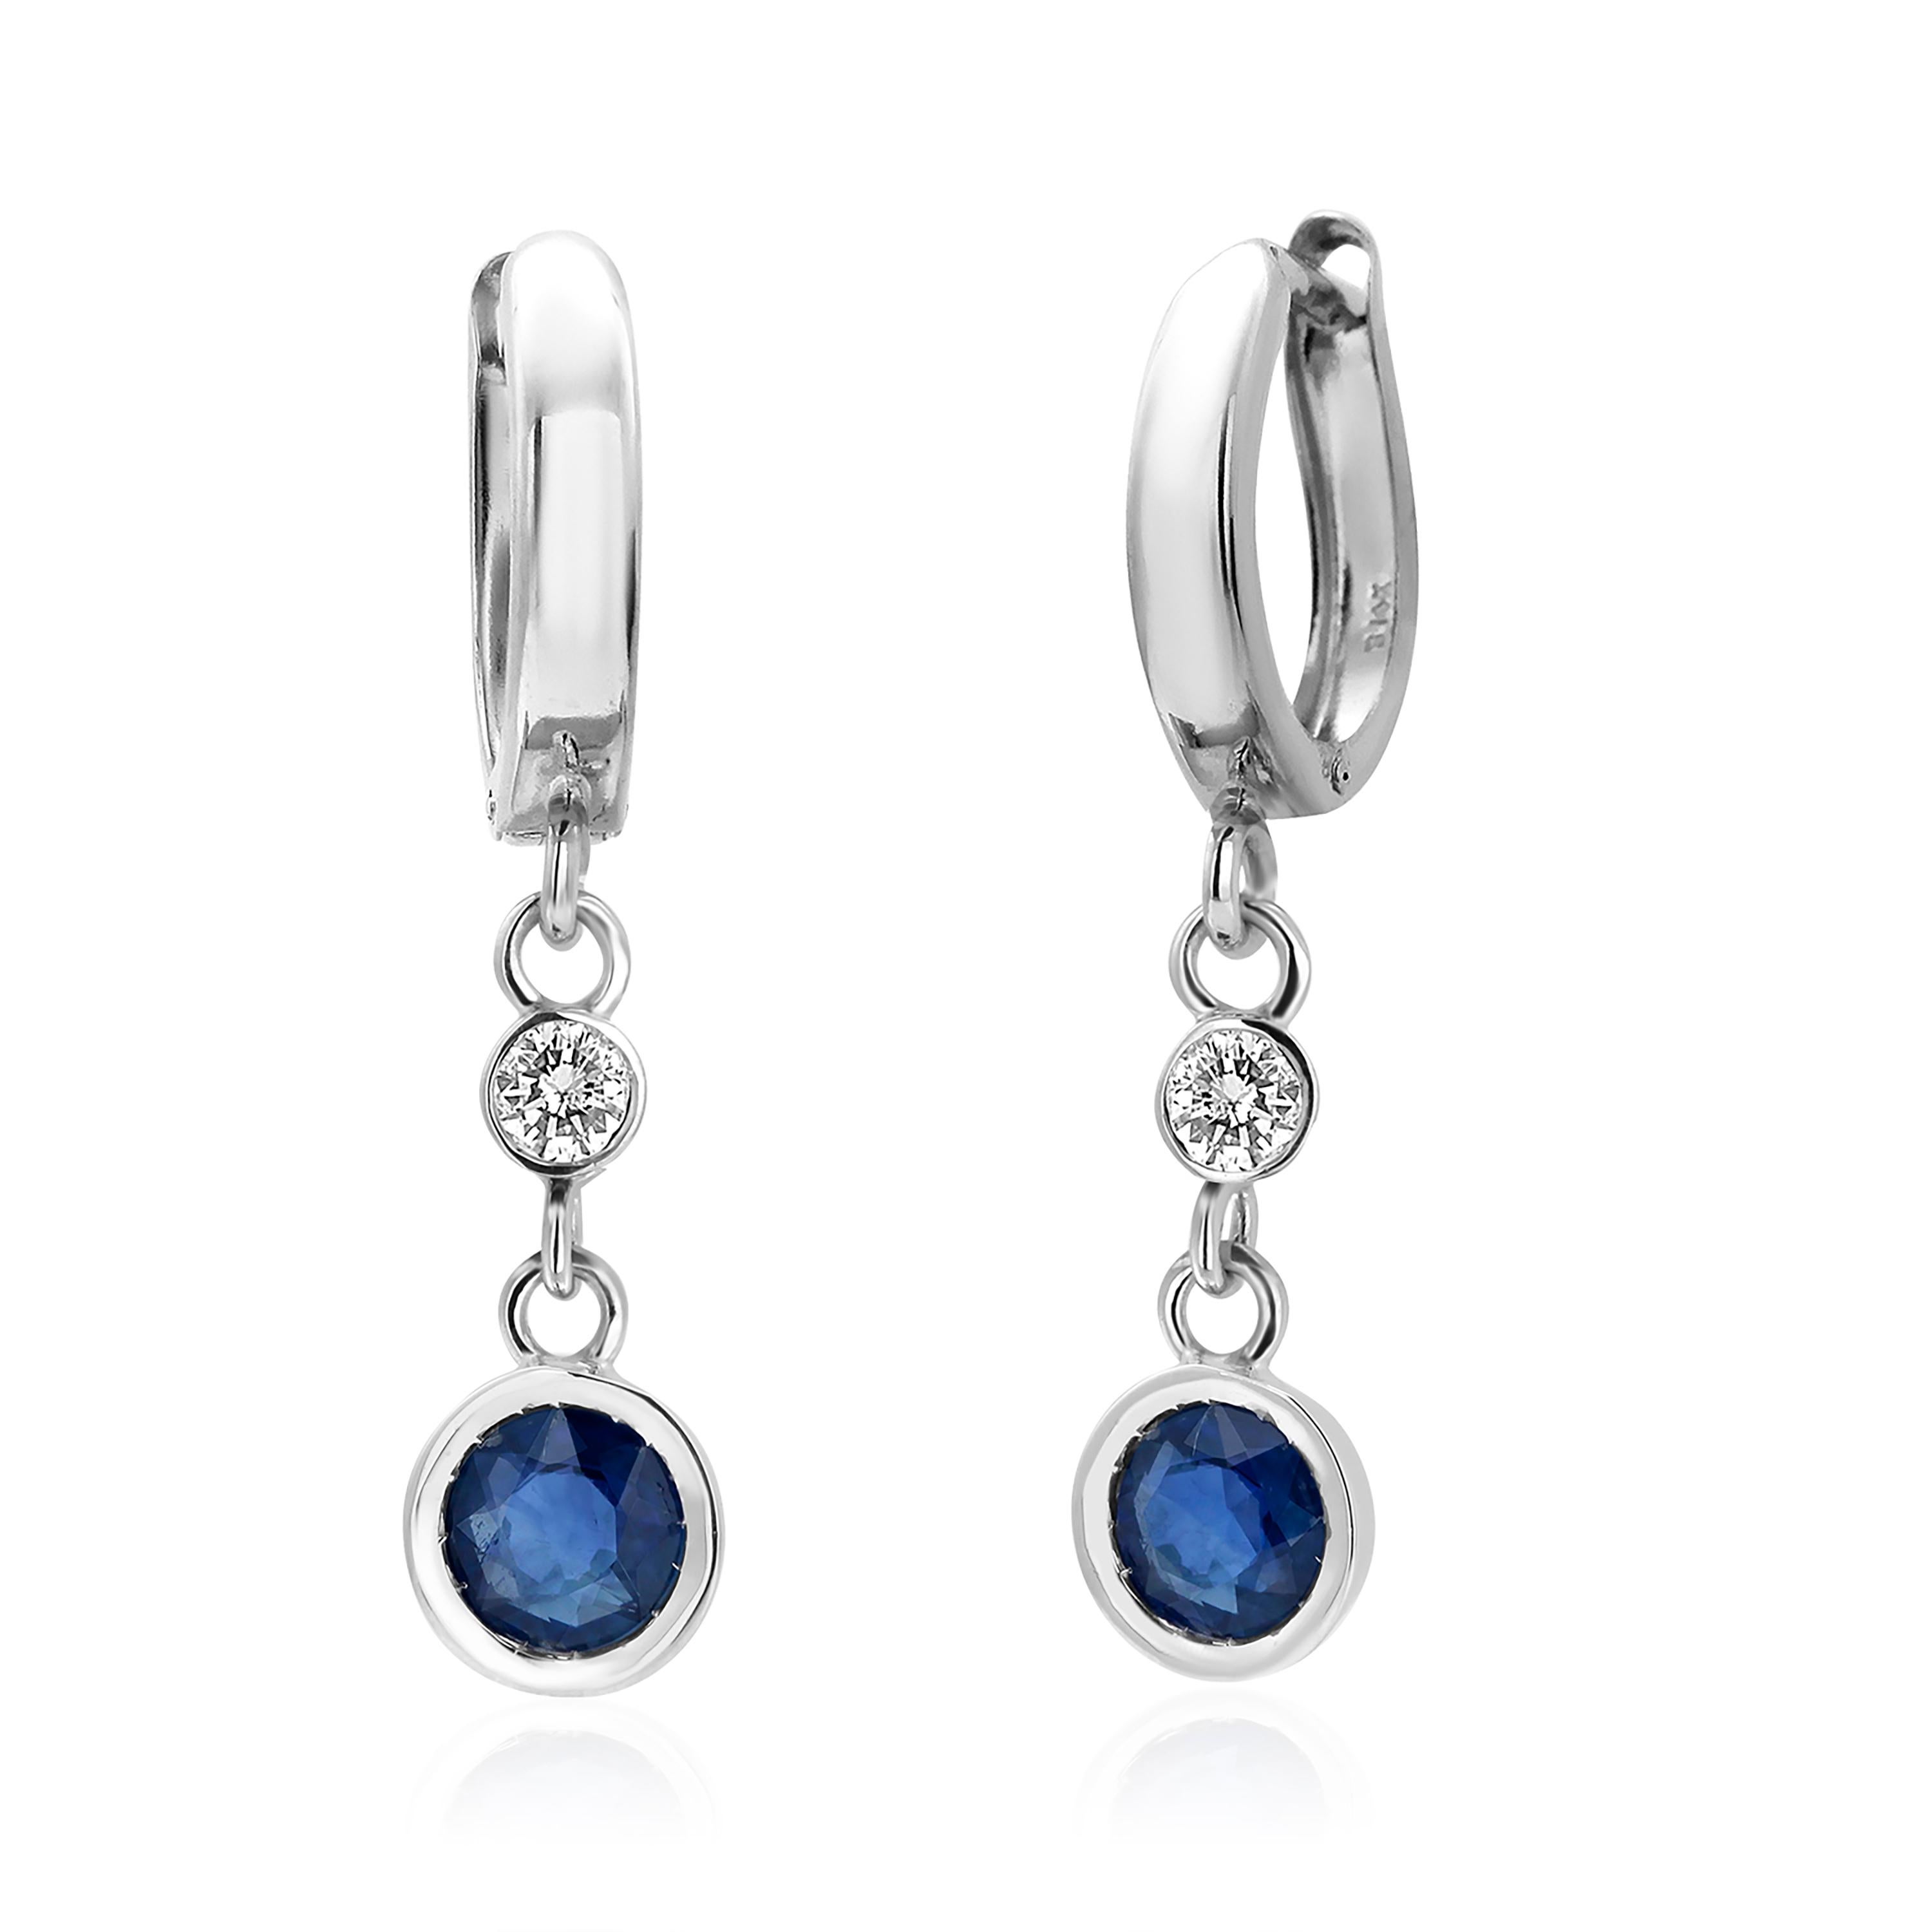 Round Cut Matched Sapphires Diamond 1.35 Carat 1.25 Inch Long White Gold Huggie Earrings 